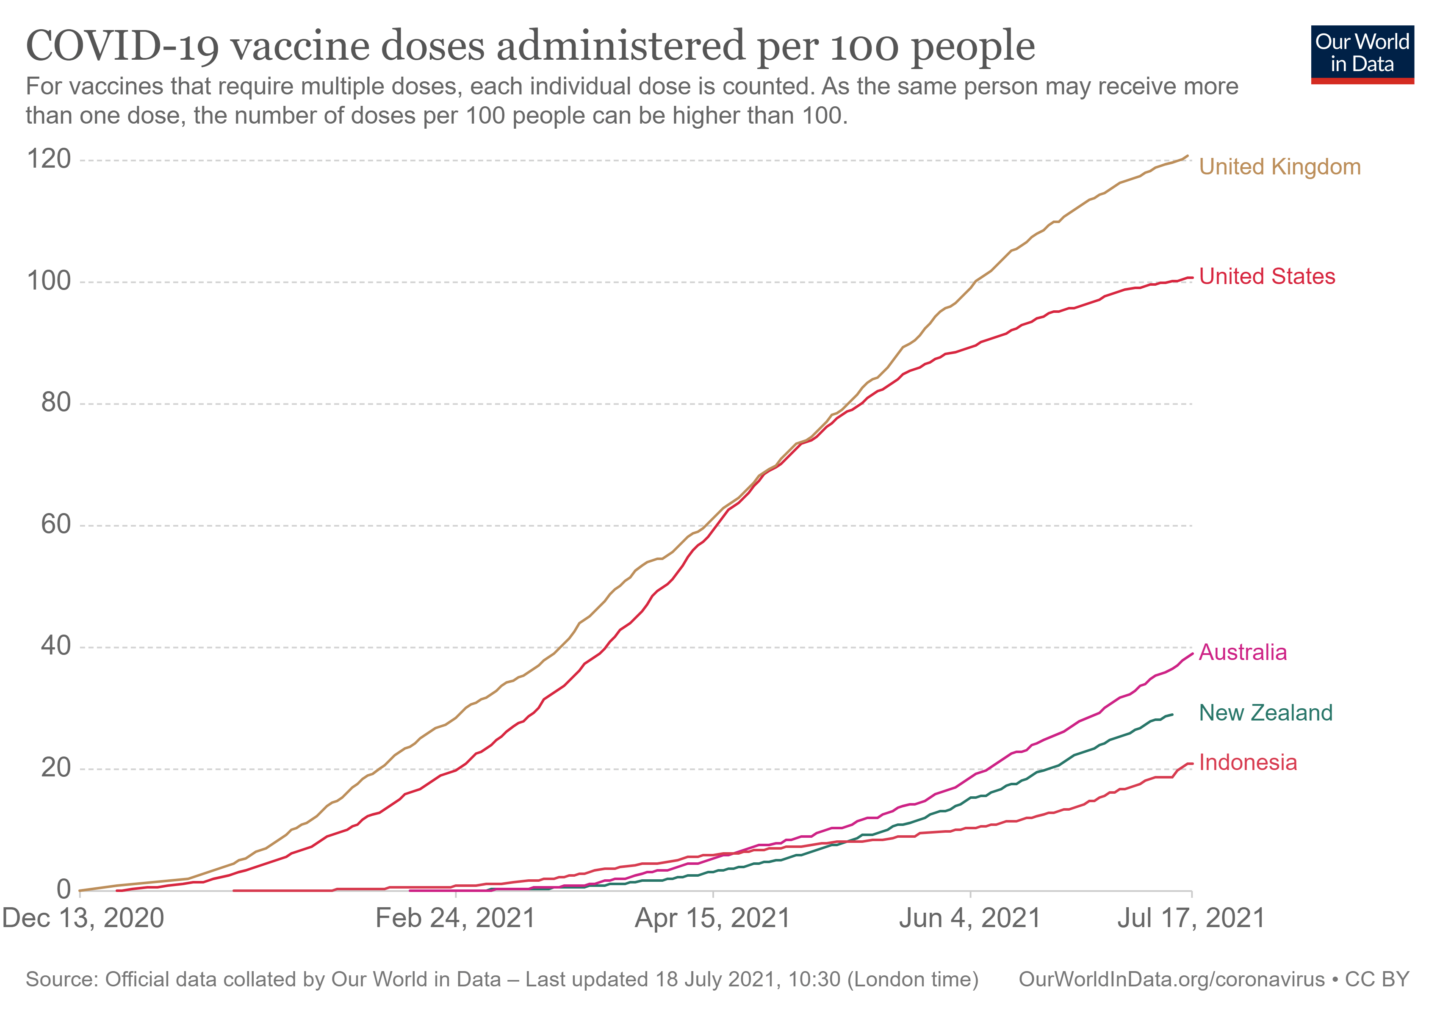 Chart showing cumulative vaccines per 100 people in different countries. Lines are increaseing for all countries. Uk is the higest at 120 by july 17, followed by us, australia at 40, nz and indonesia.